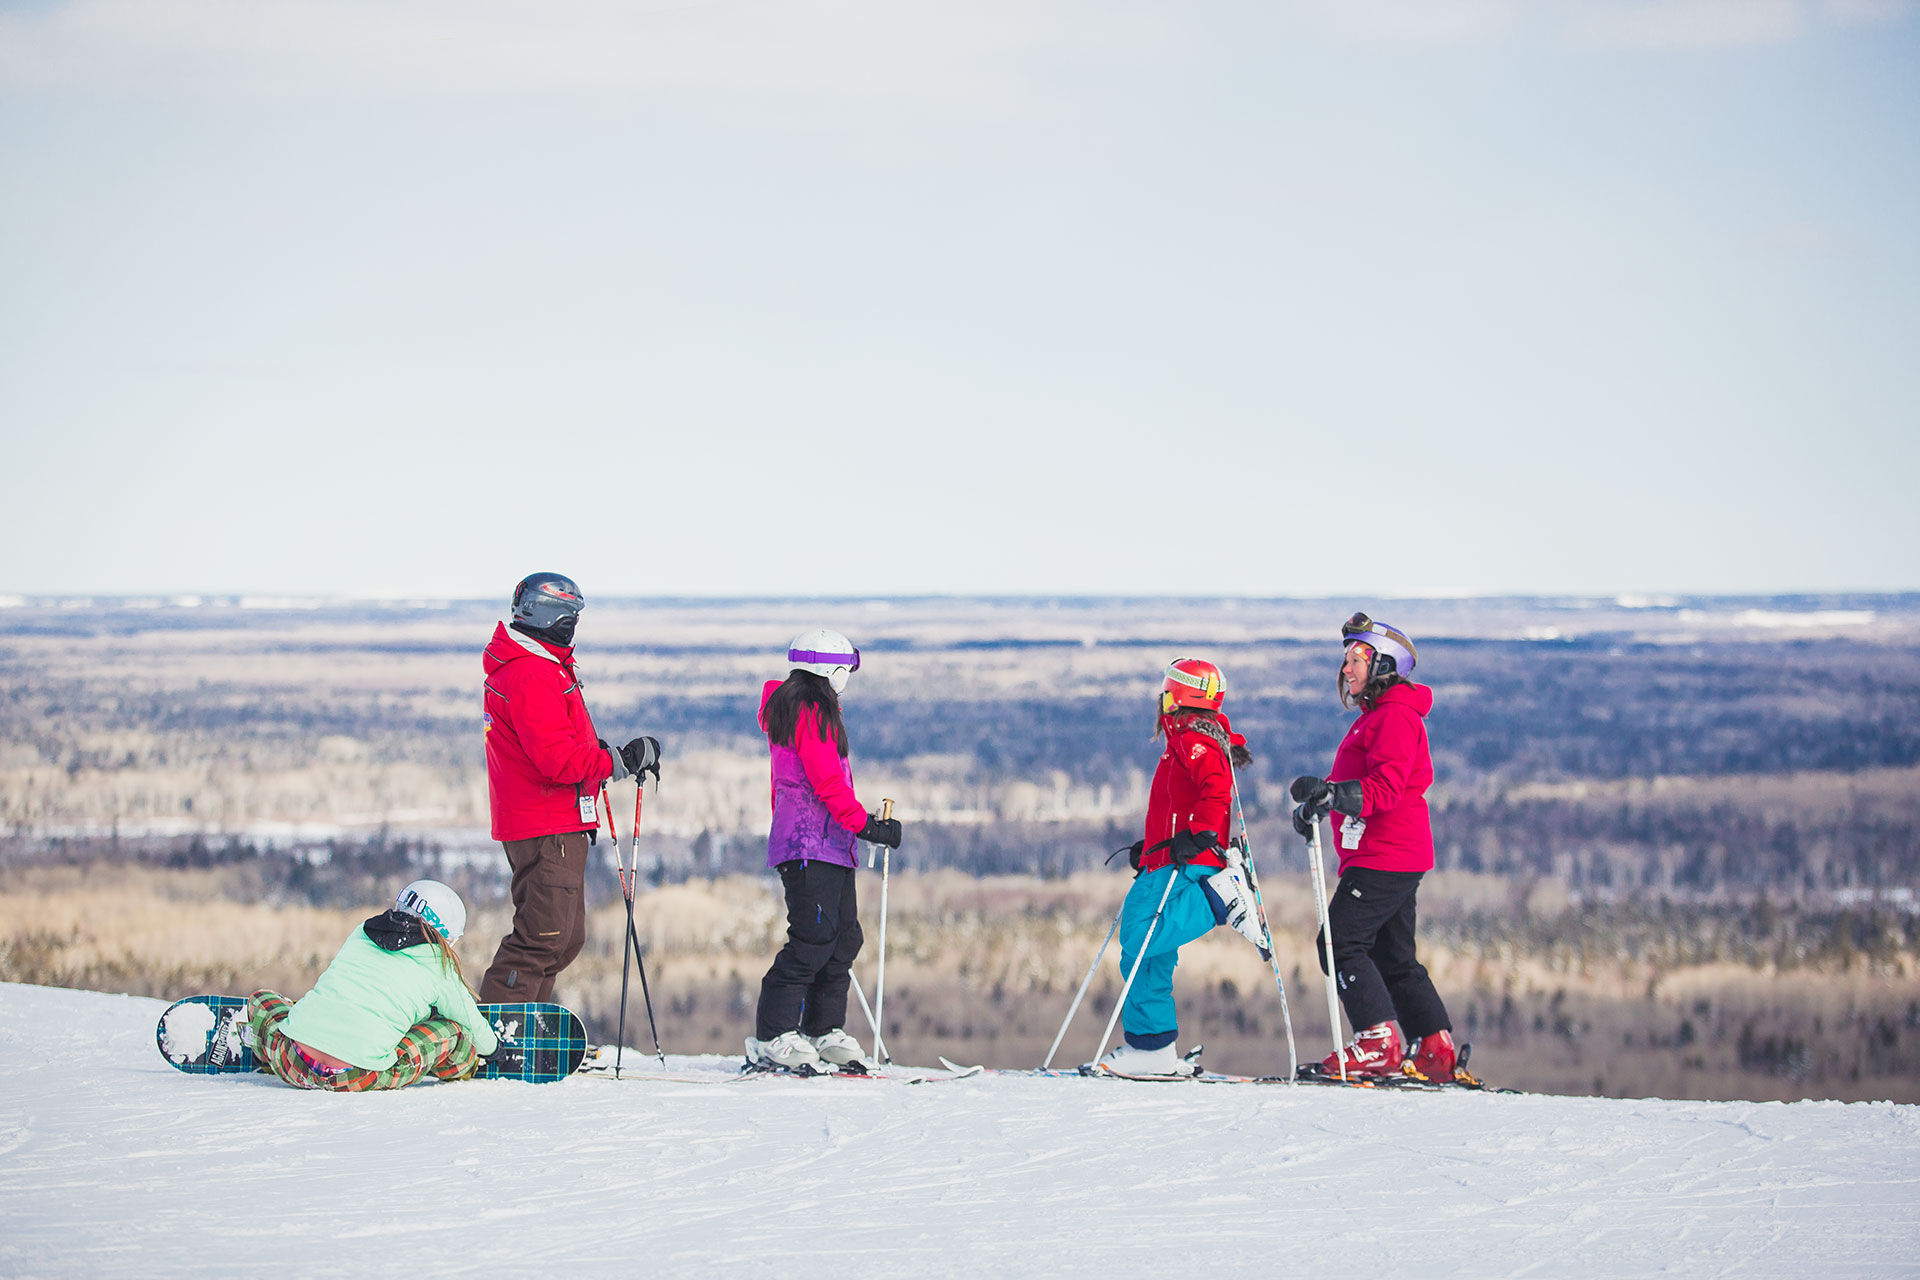 a family of four skiers and one snowboarder prepare to start a downhill run